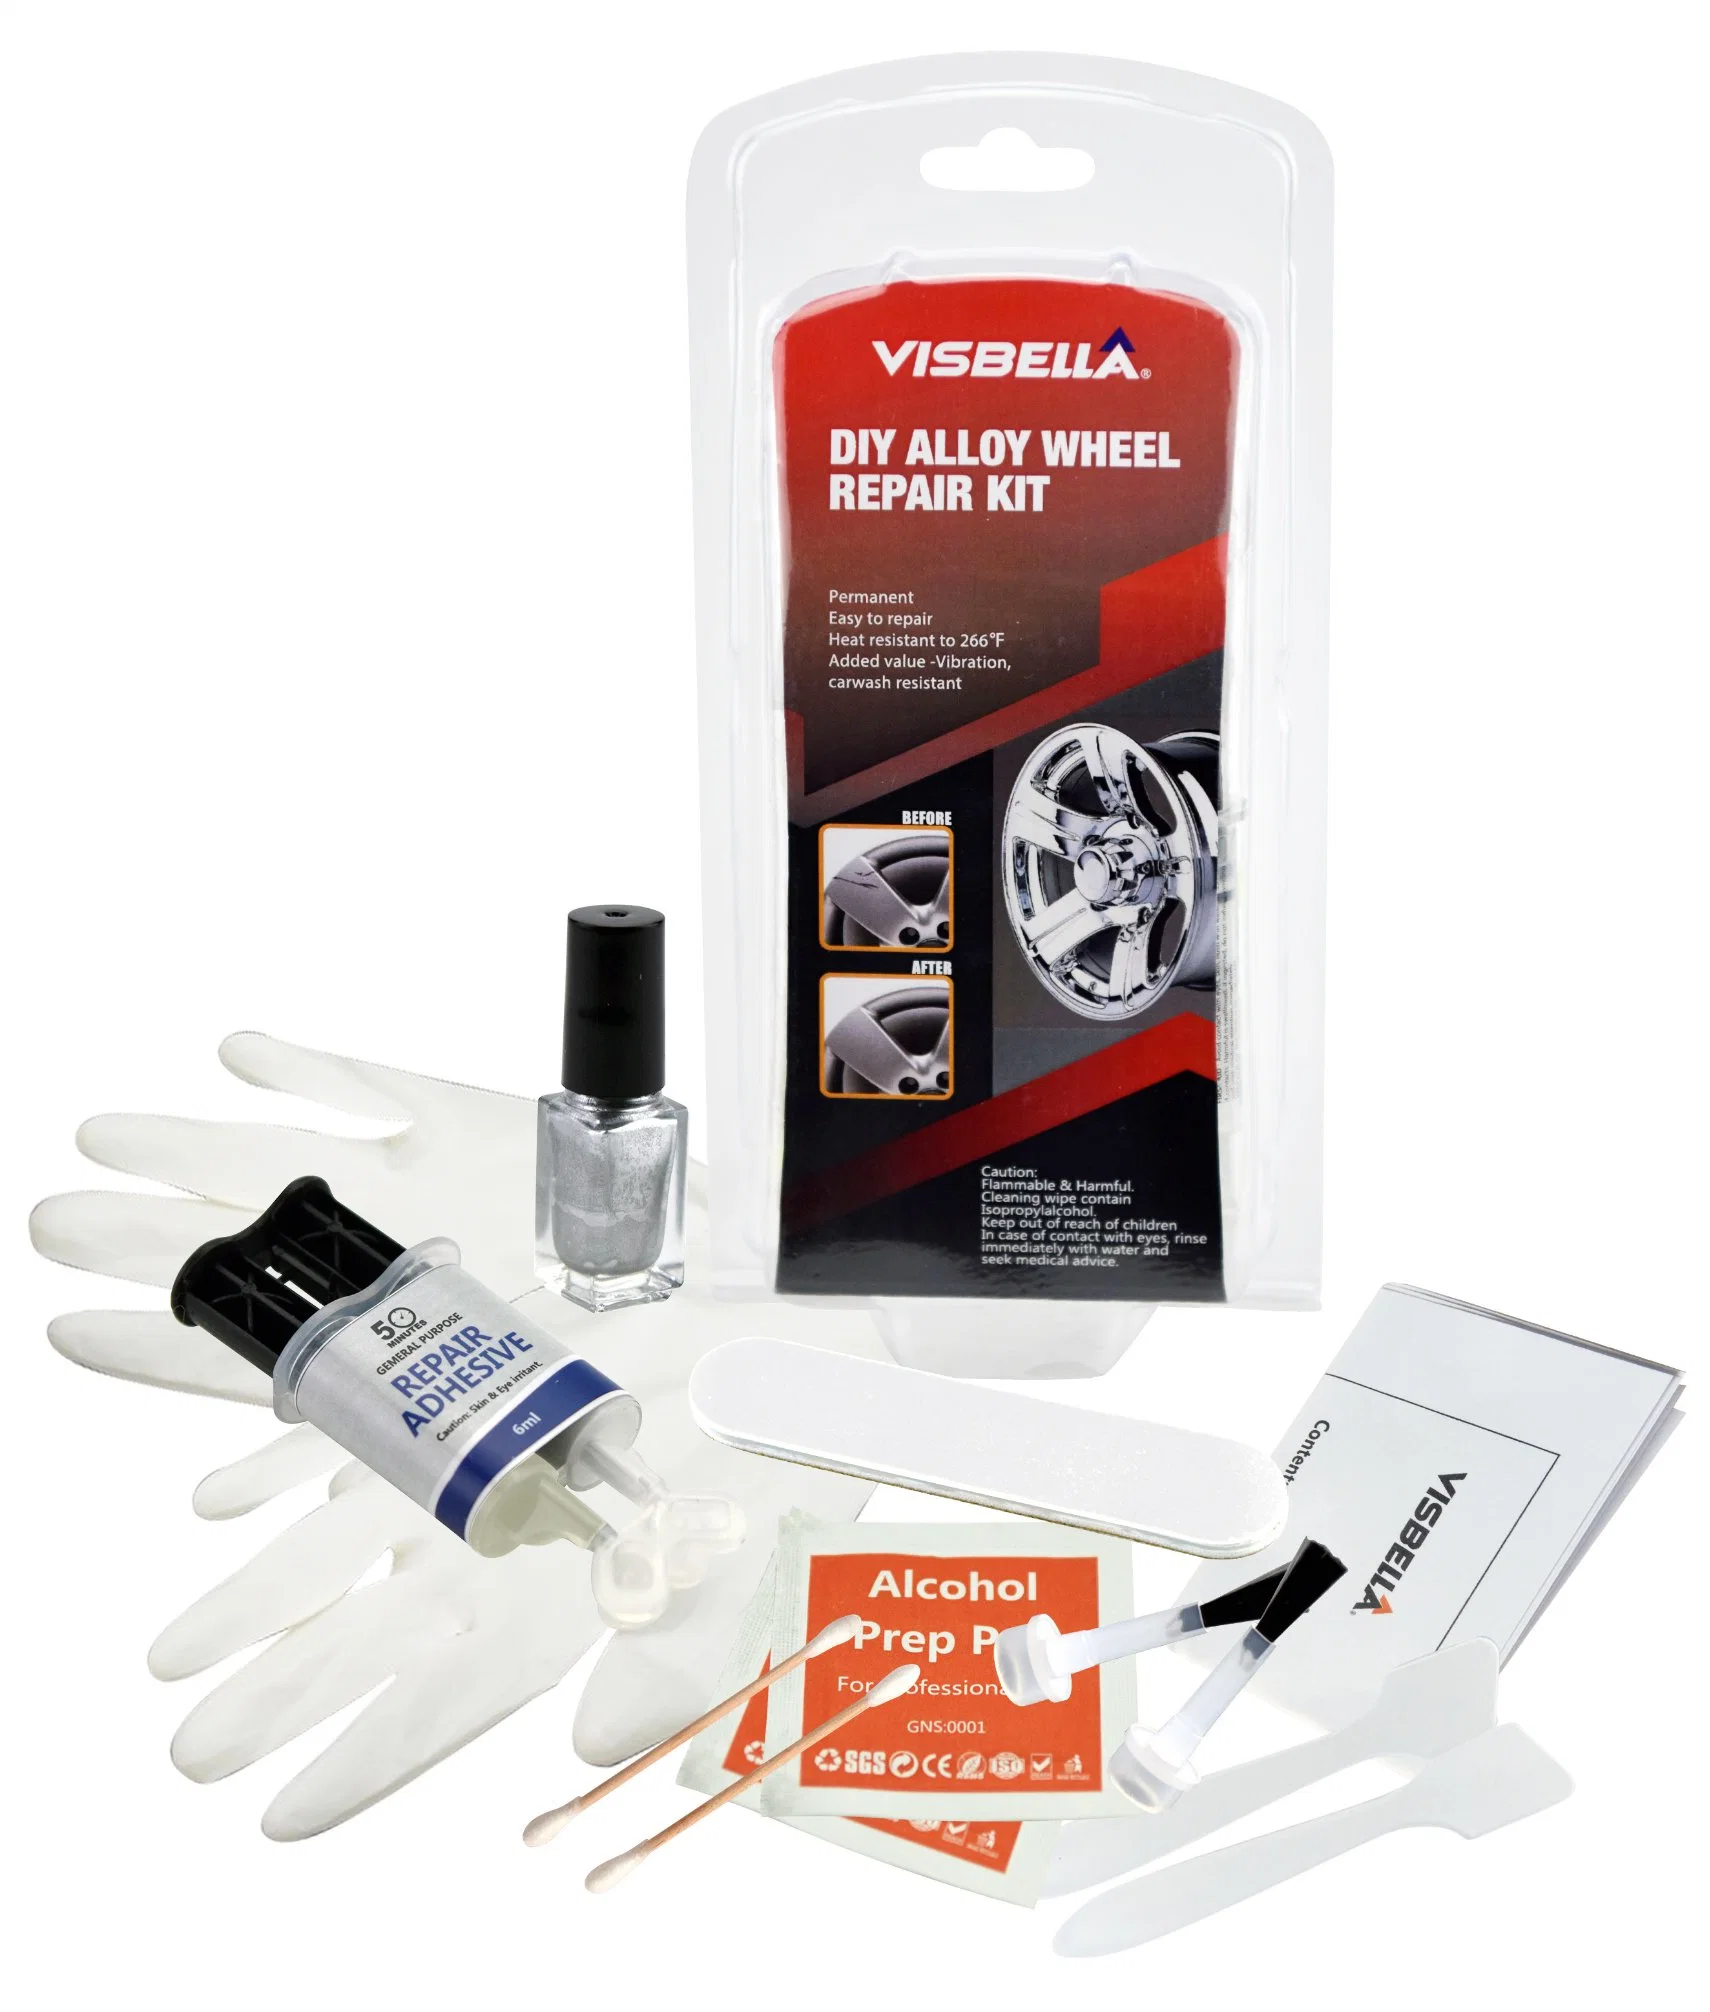 Visbella DIY Alloy Wheel Repair Kit with High quality/High cost performance 